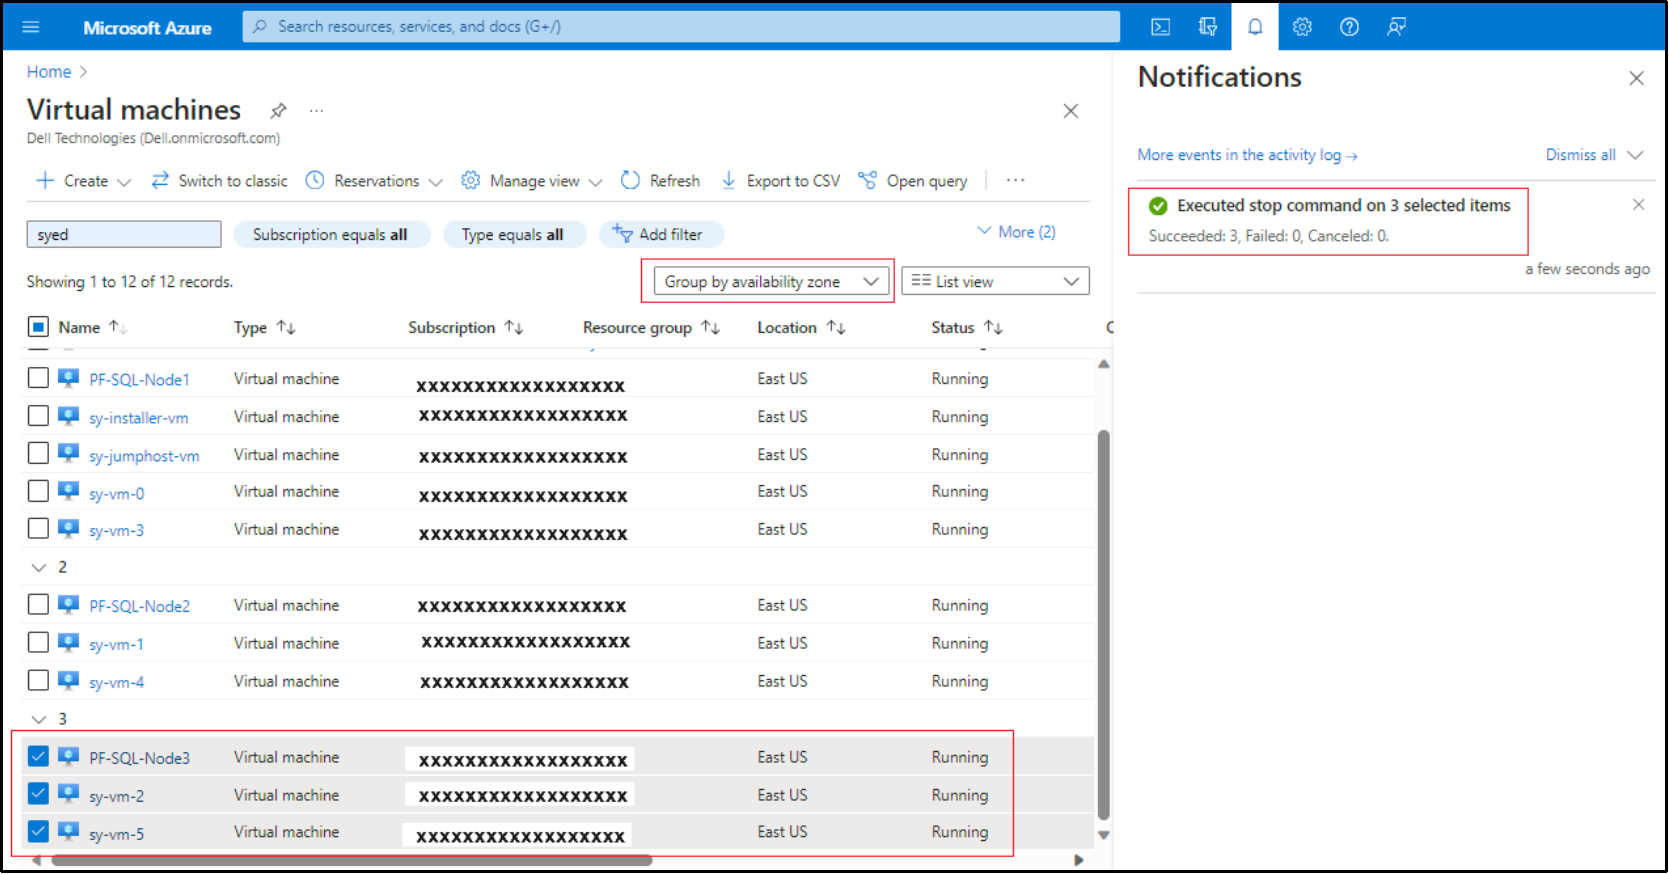 This figure shows the virtual machines in the Azure public portal.